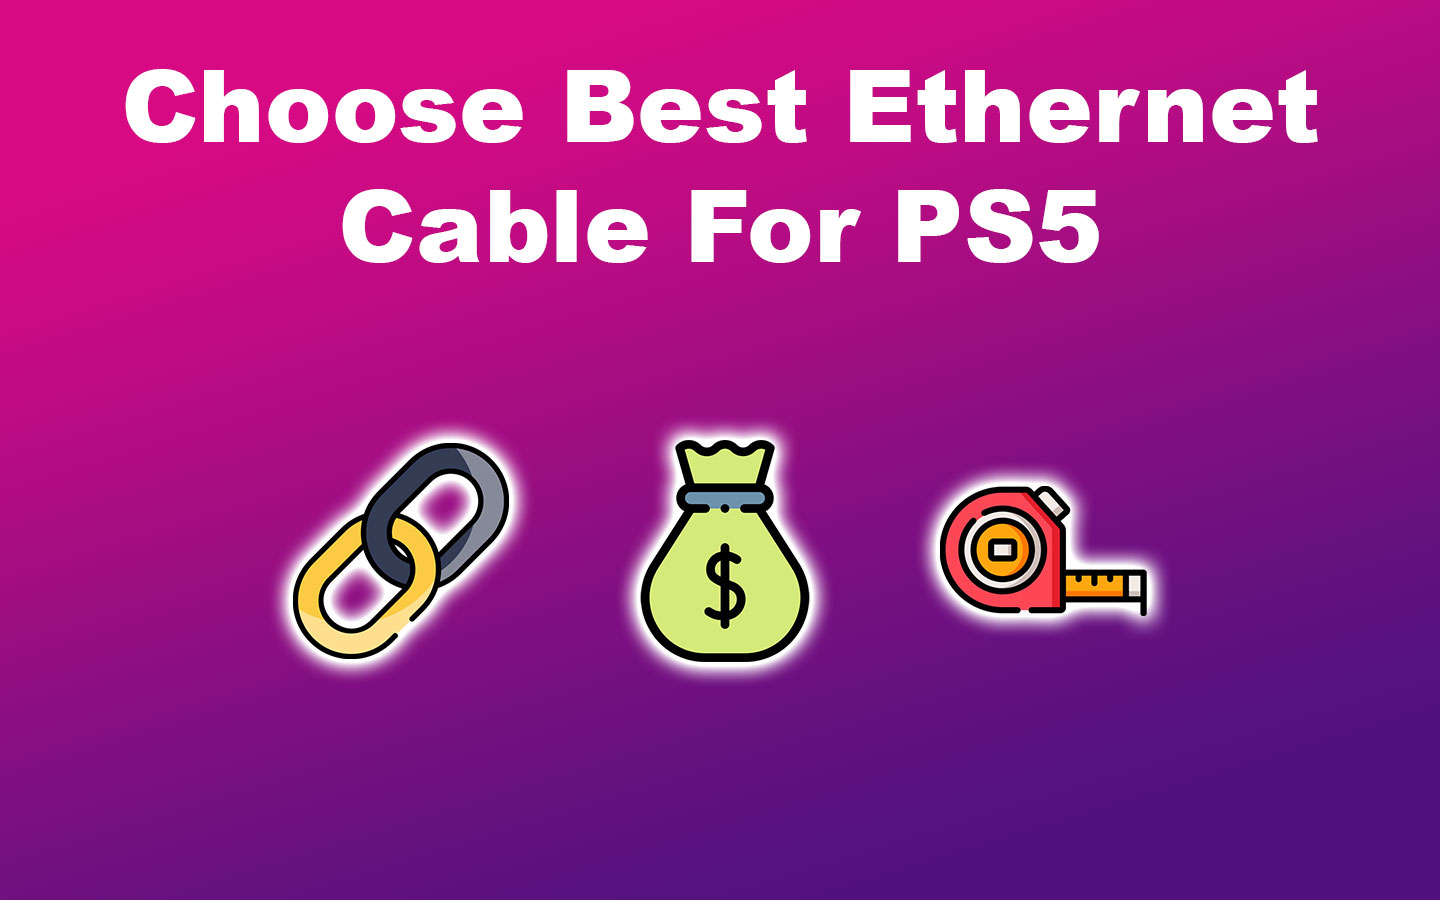 Choose Best Ethernet Cable For PS5